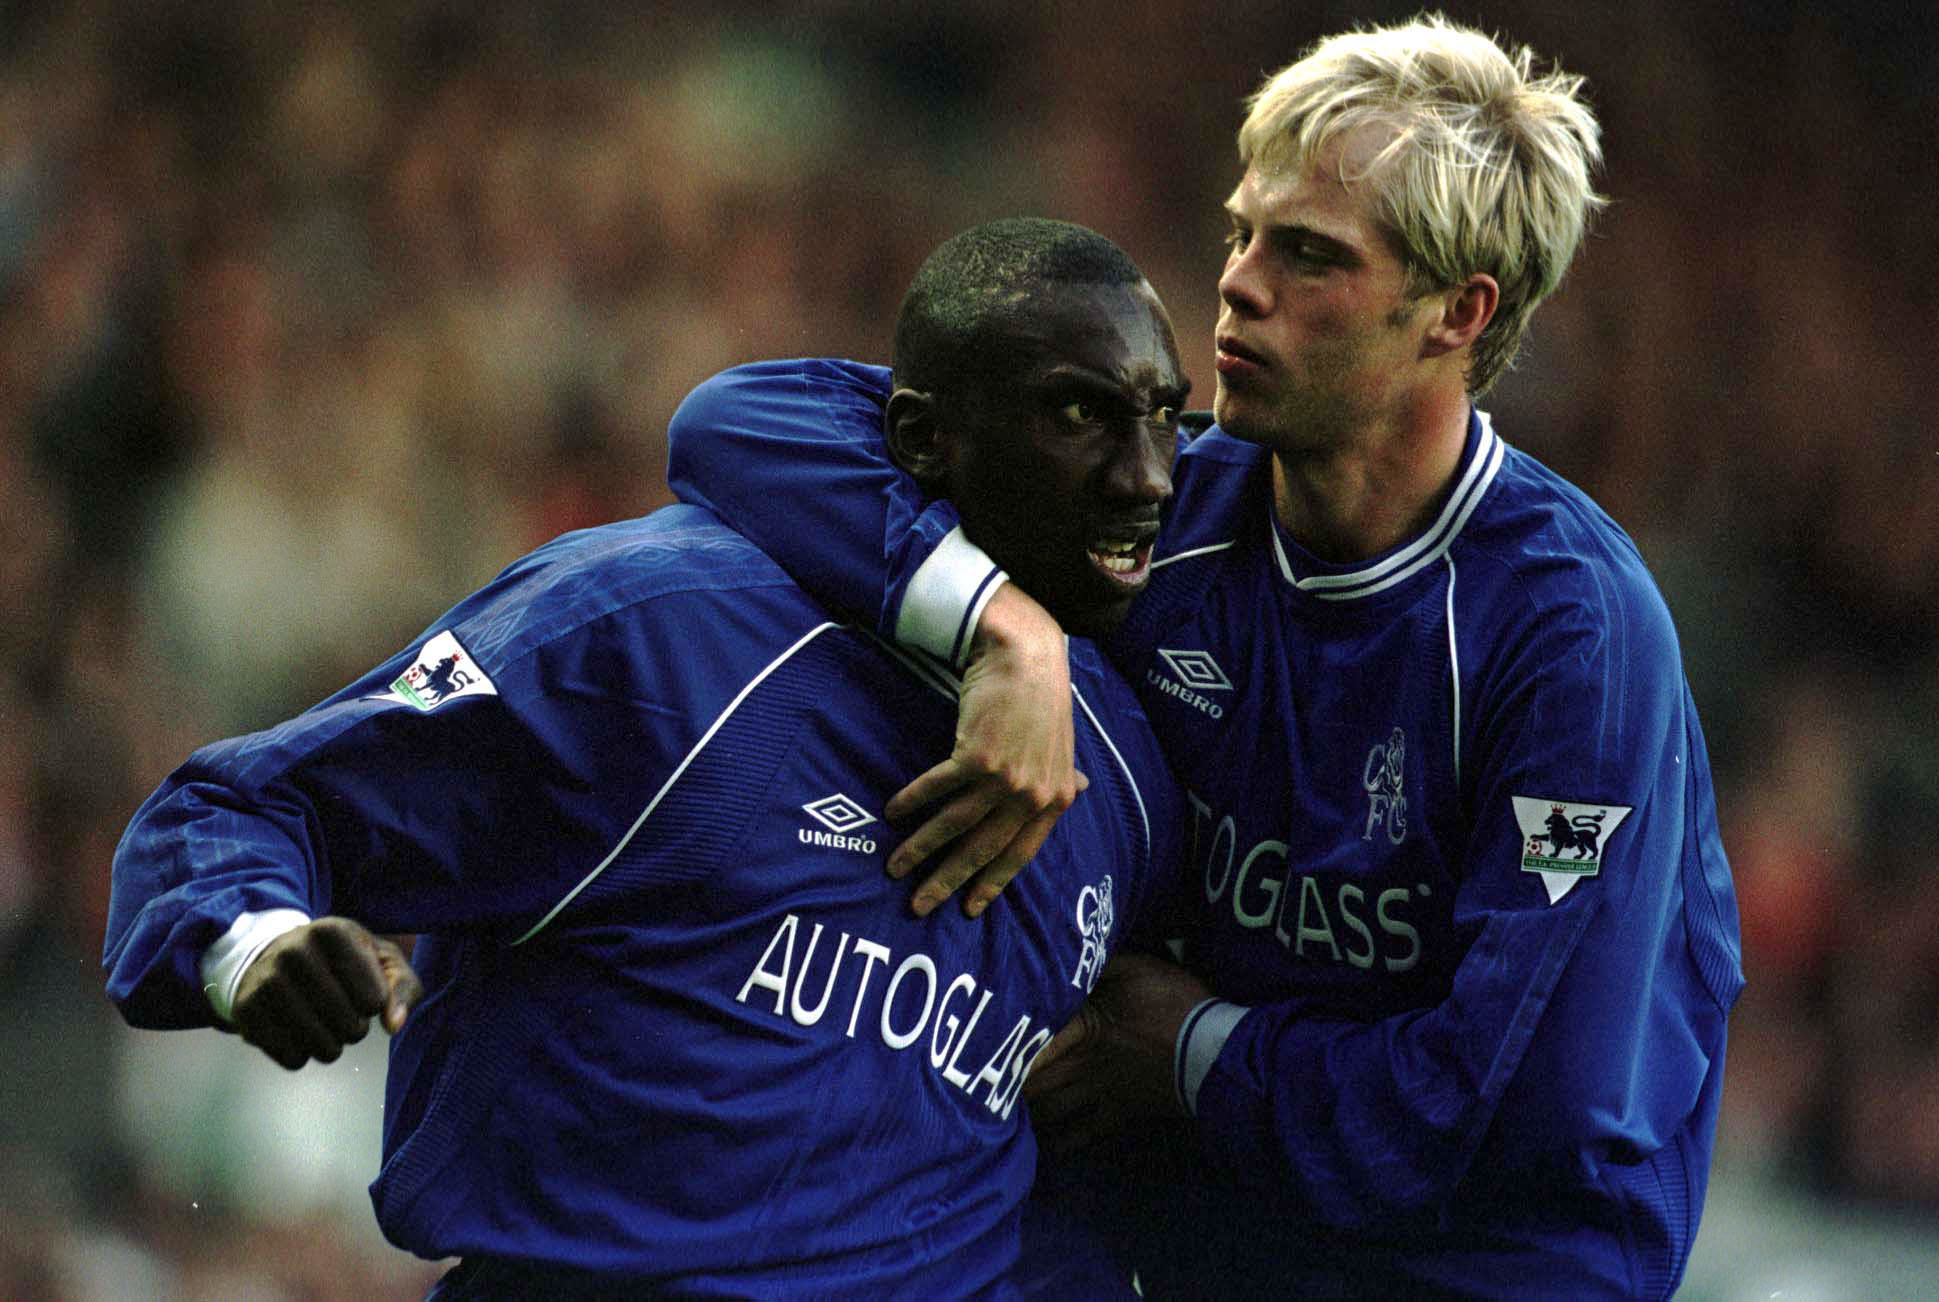 Chelsea duo Eidur Gugjohnsen and Jimmy Floyd Hasselbaink.